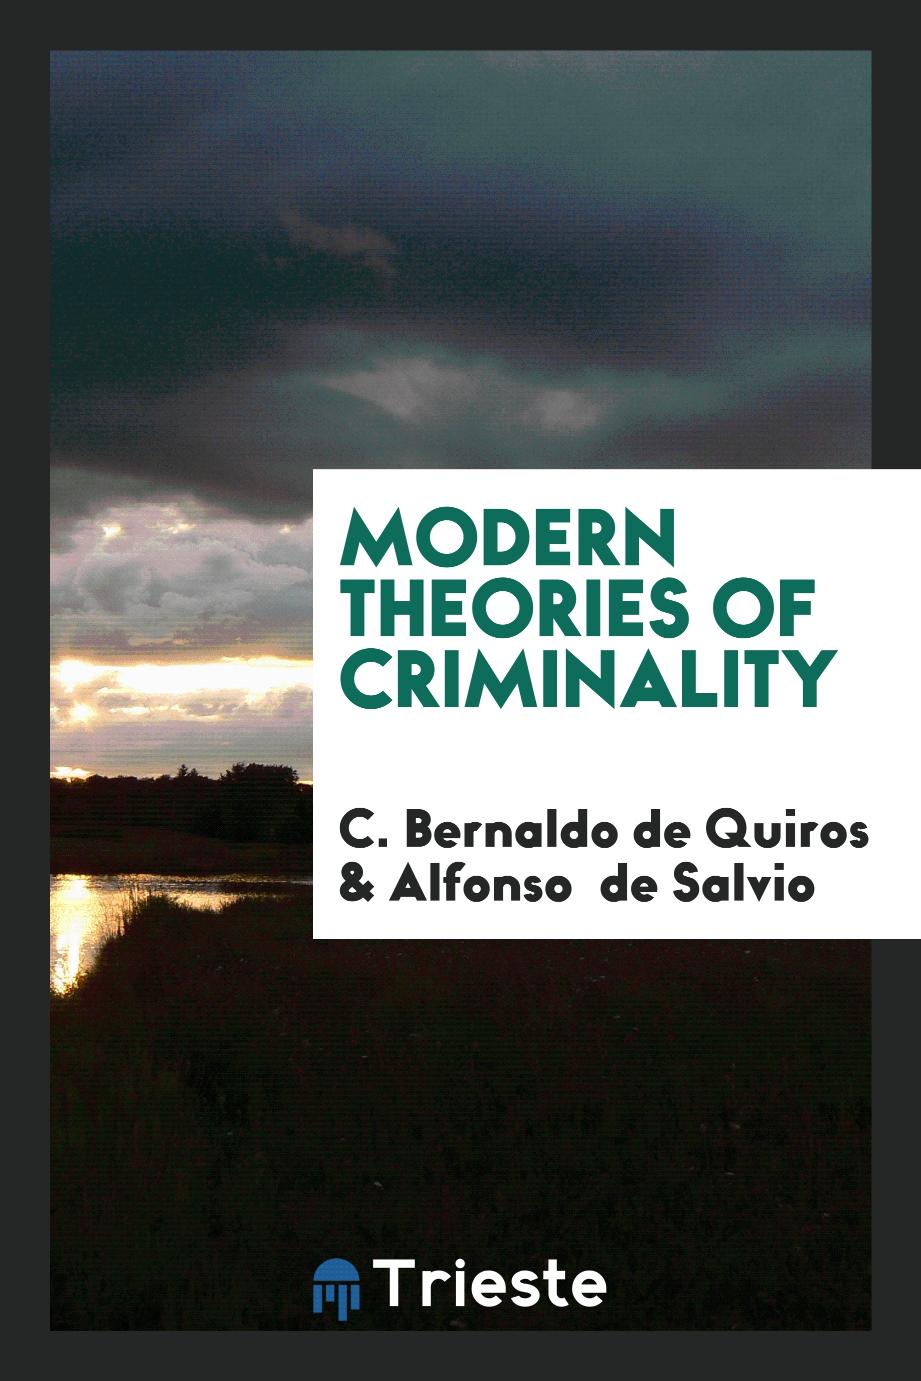 Modern theories of criminality